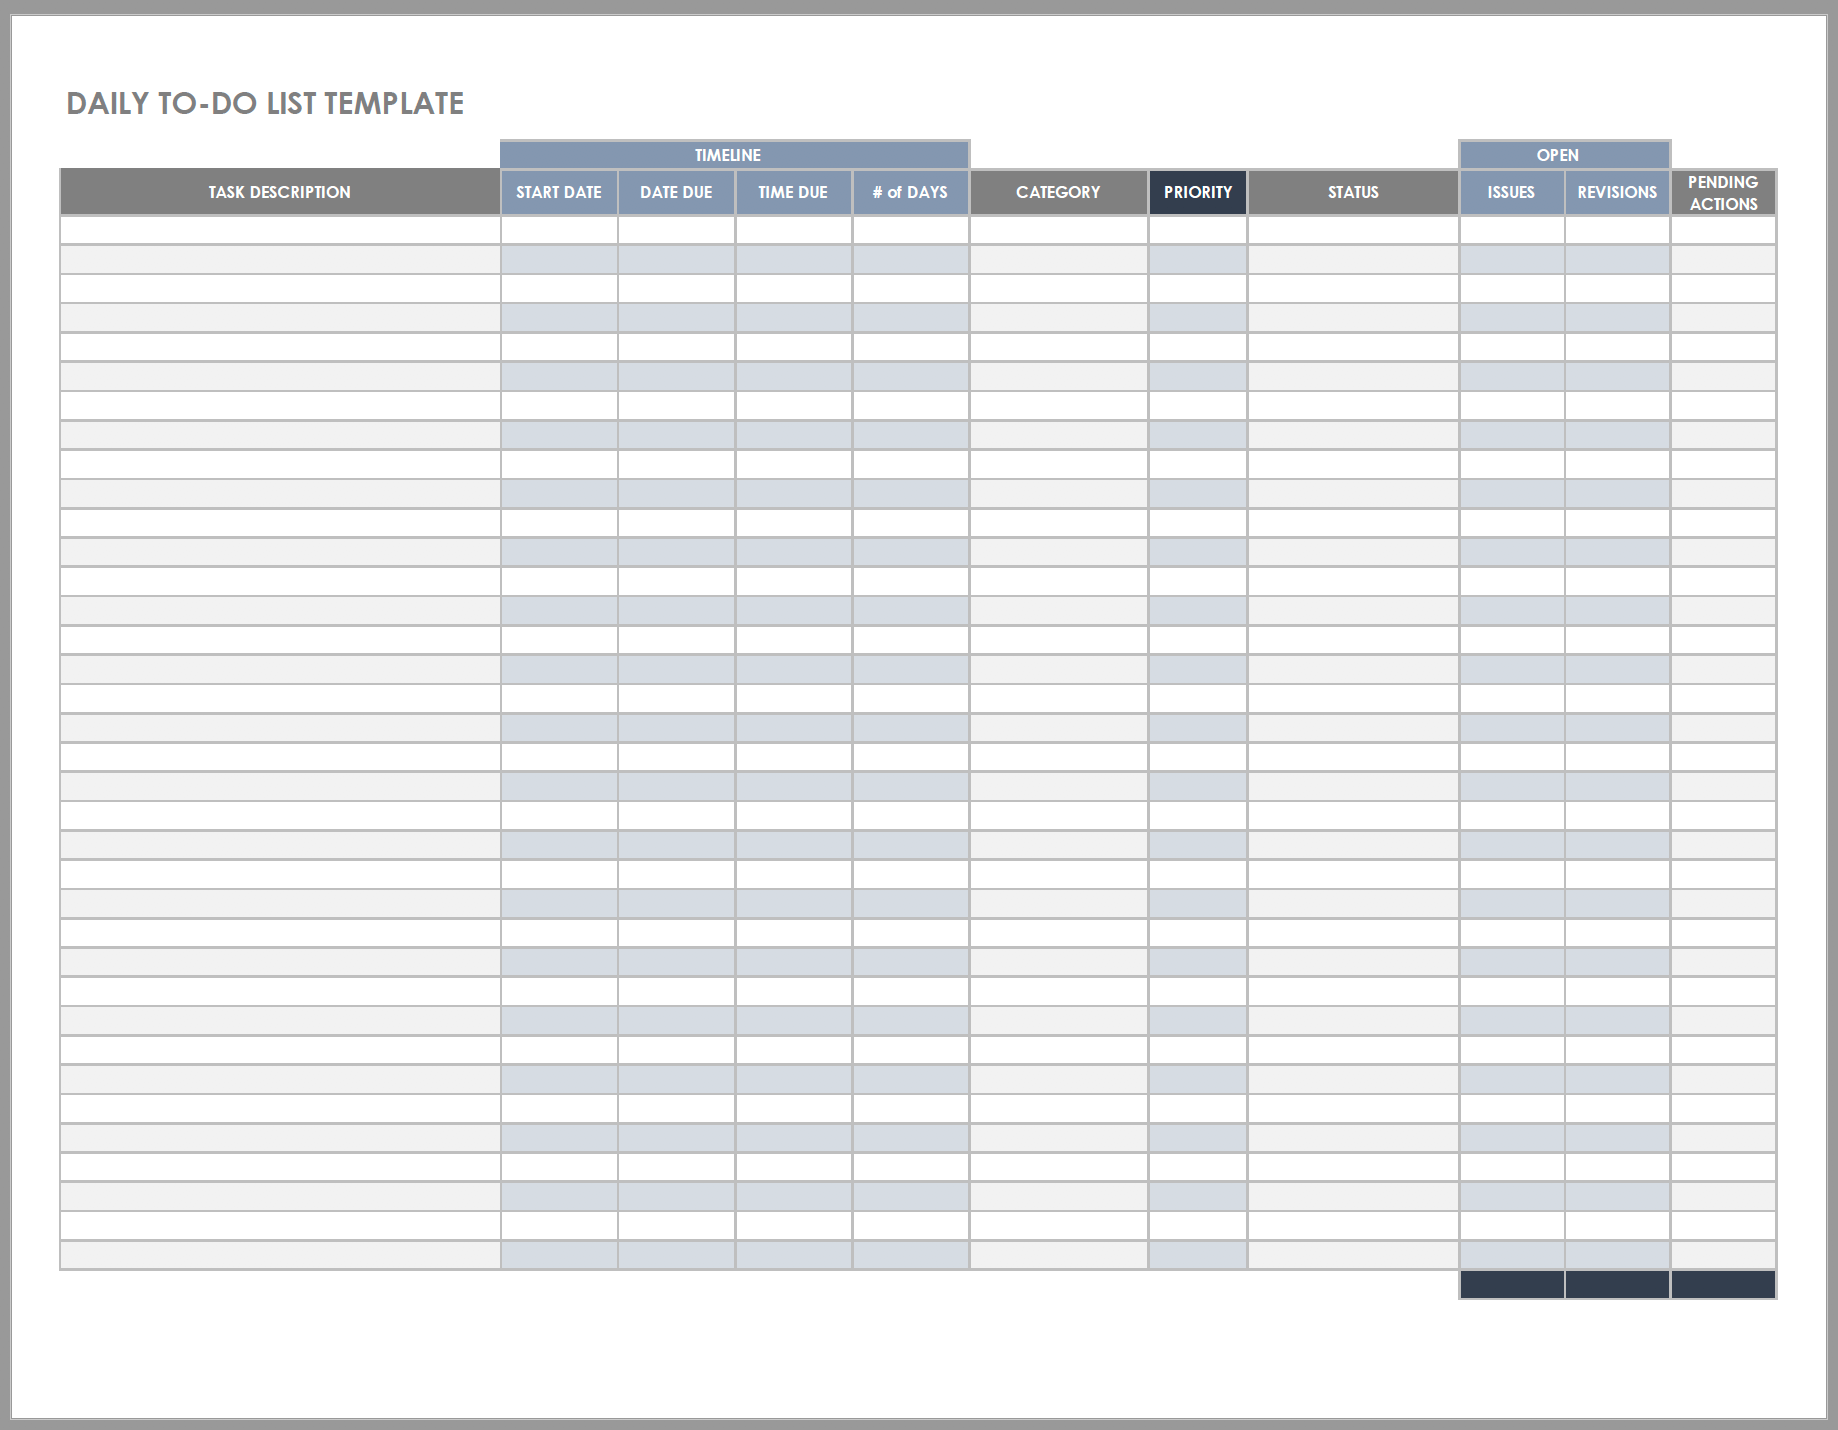 Free Daily Work Schedule Templates  Smartsheet For Daily Routine Checklist Template Within Daily Routine Checklist Template